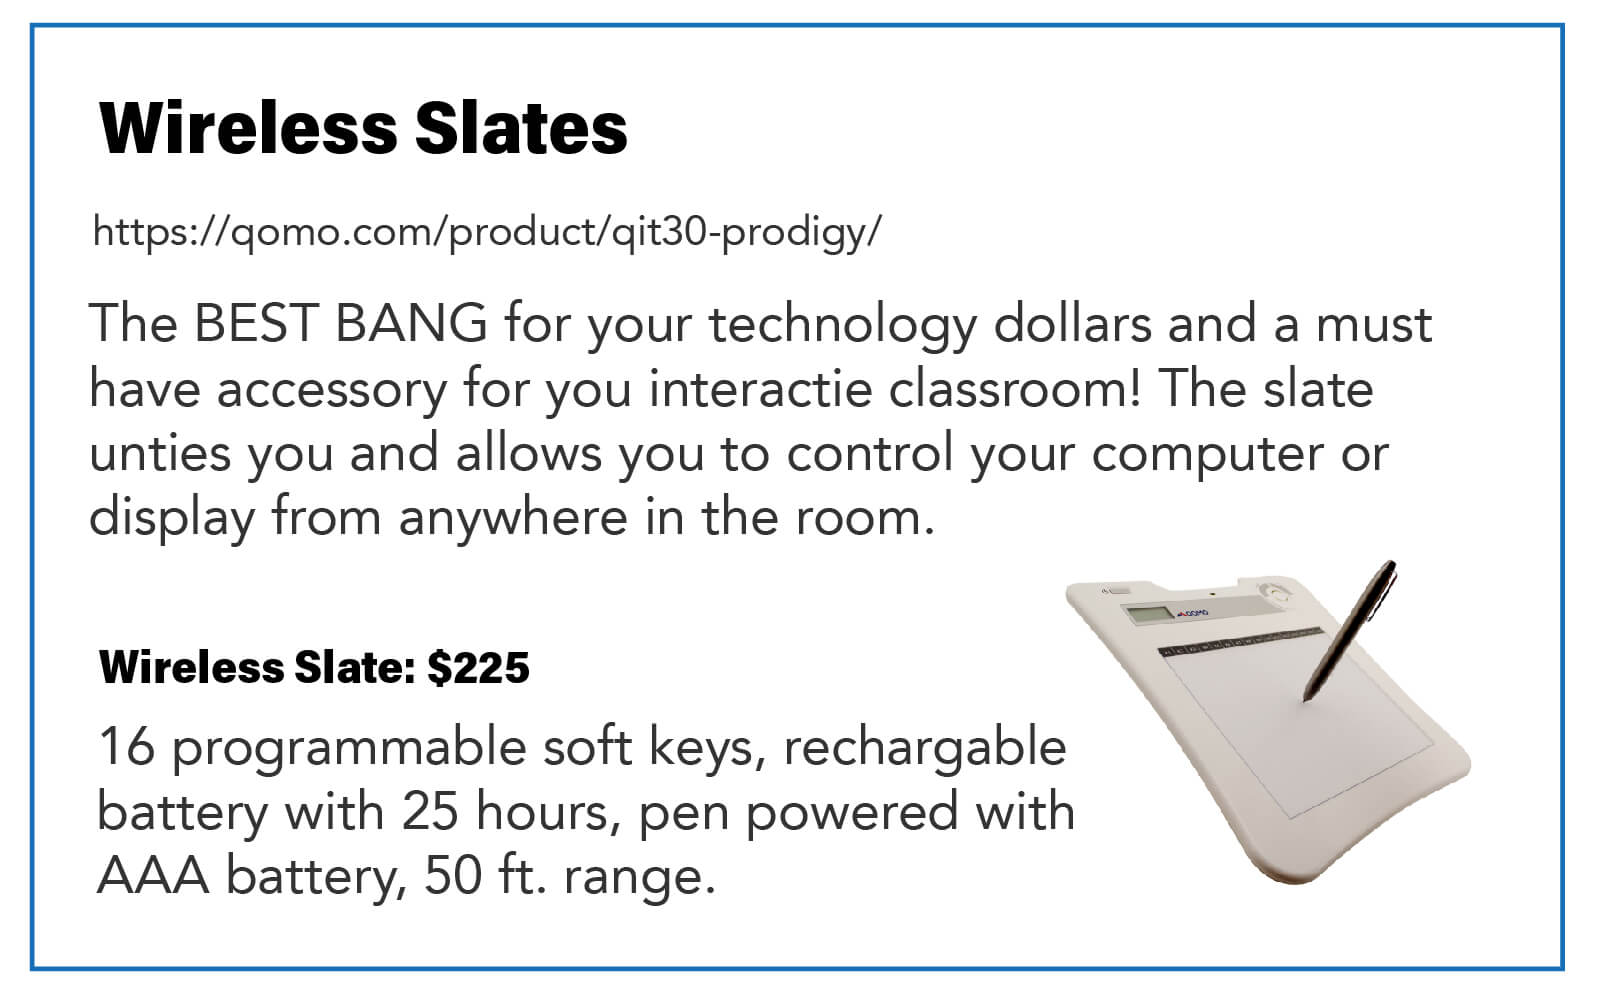 Wireless Slates: The BEST BANG for your technology dollars and a must have accessory for your interactive classroom! The slate unties you and allows you to control your computer or display from anywhere in the room.